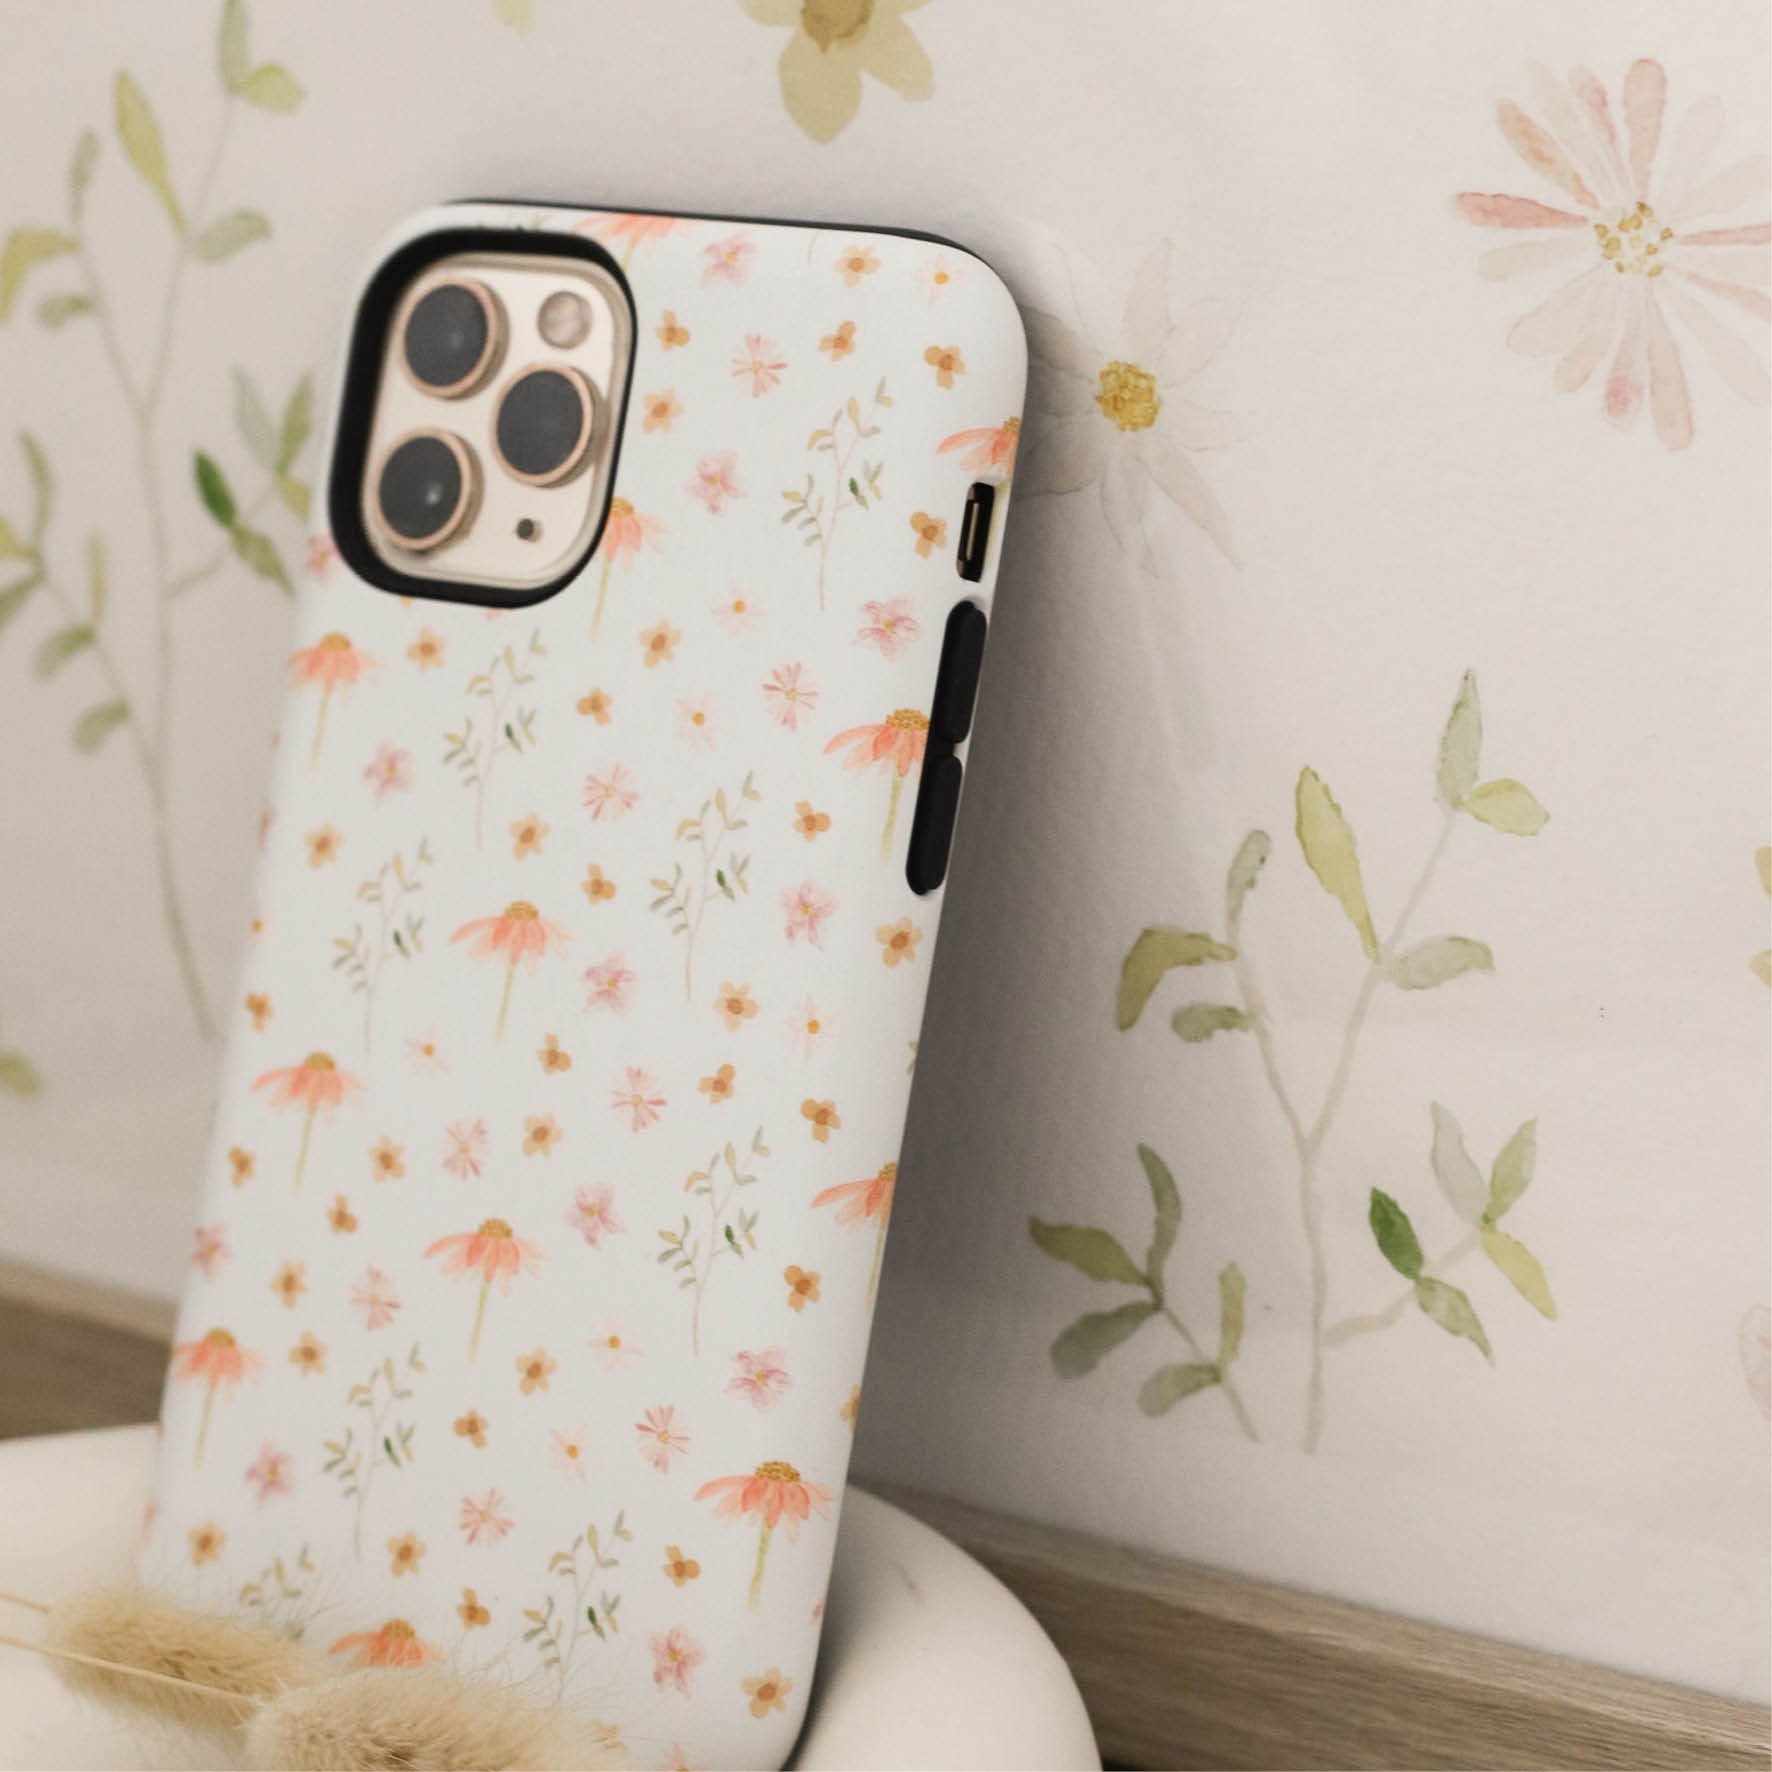 oakley-floral-phone-cover.jpg